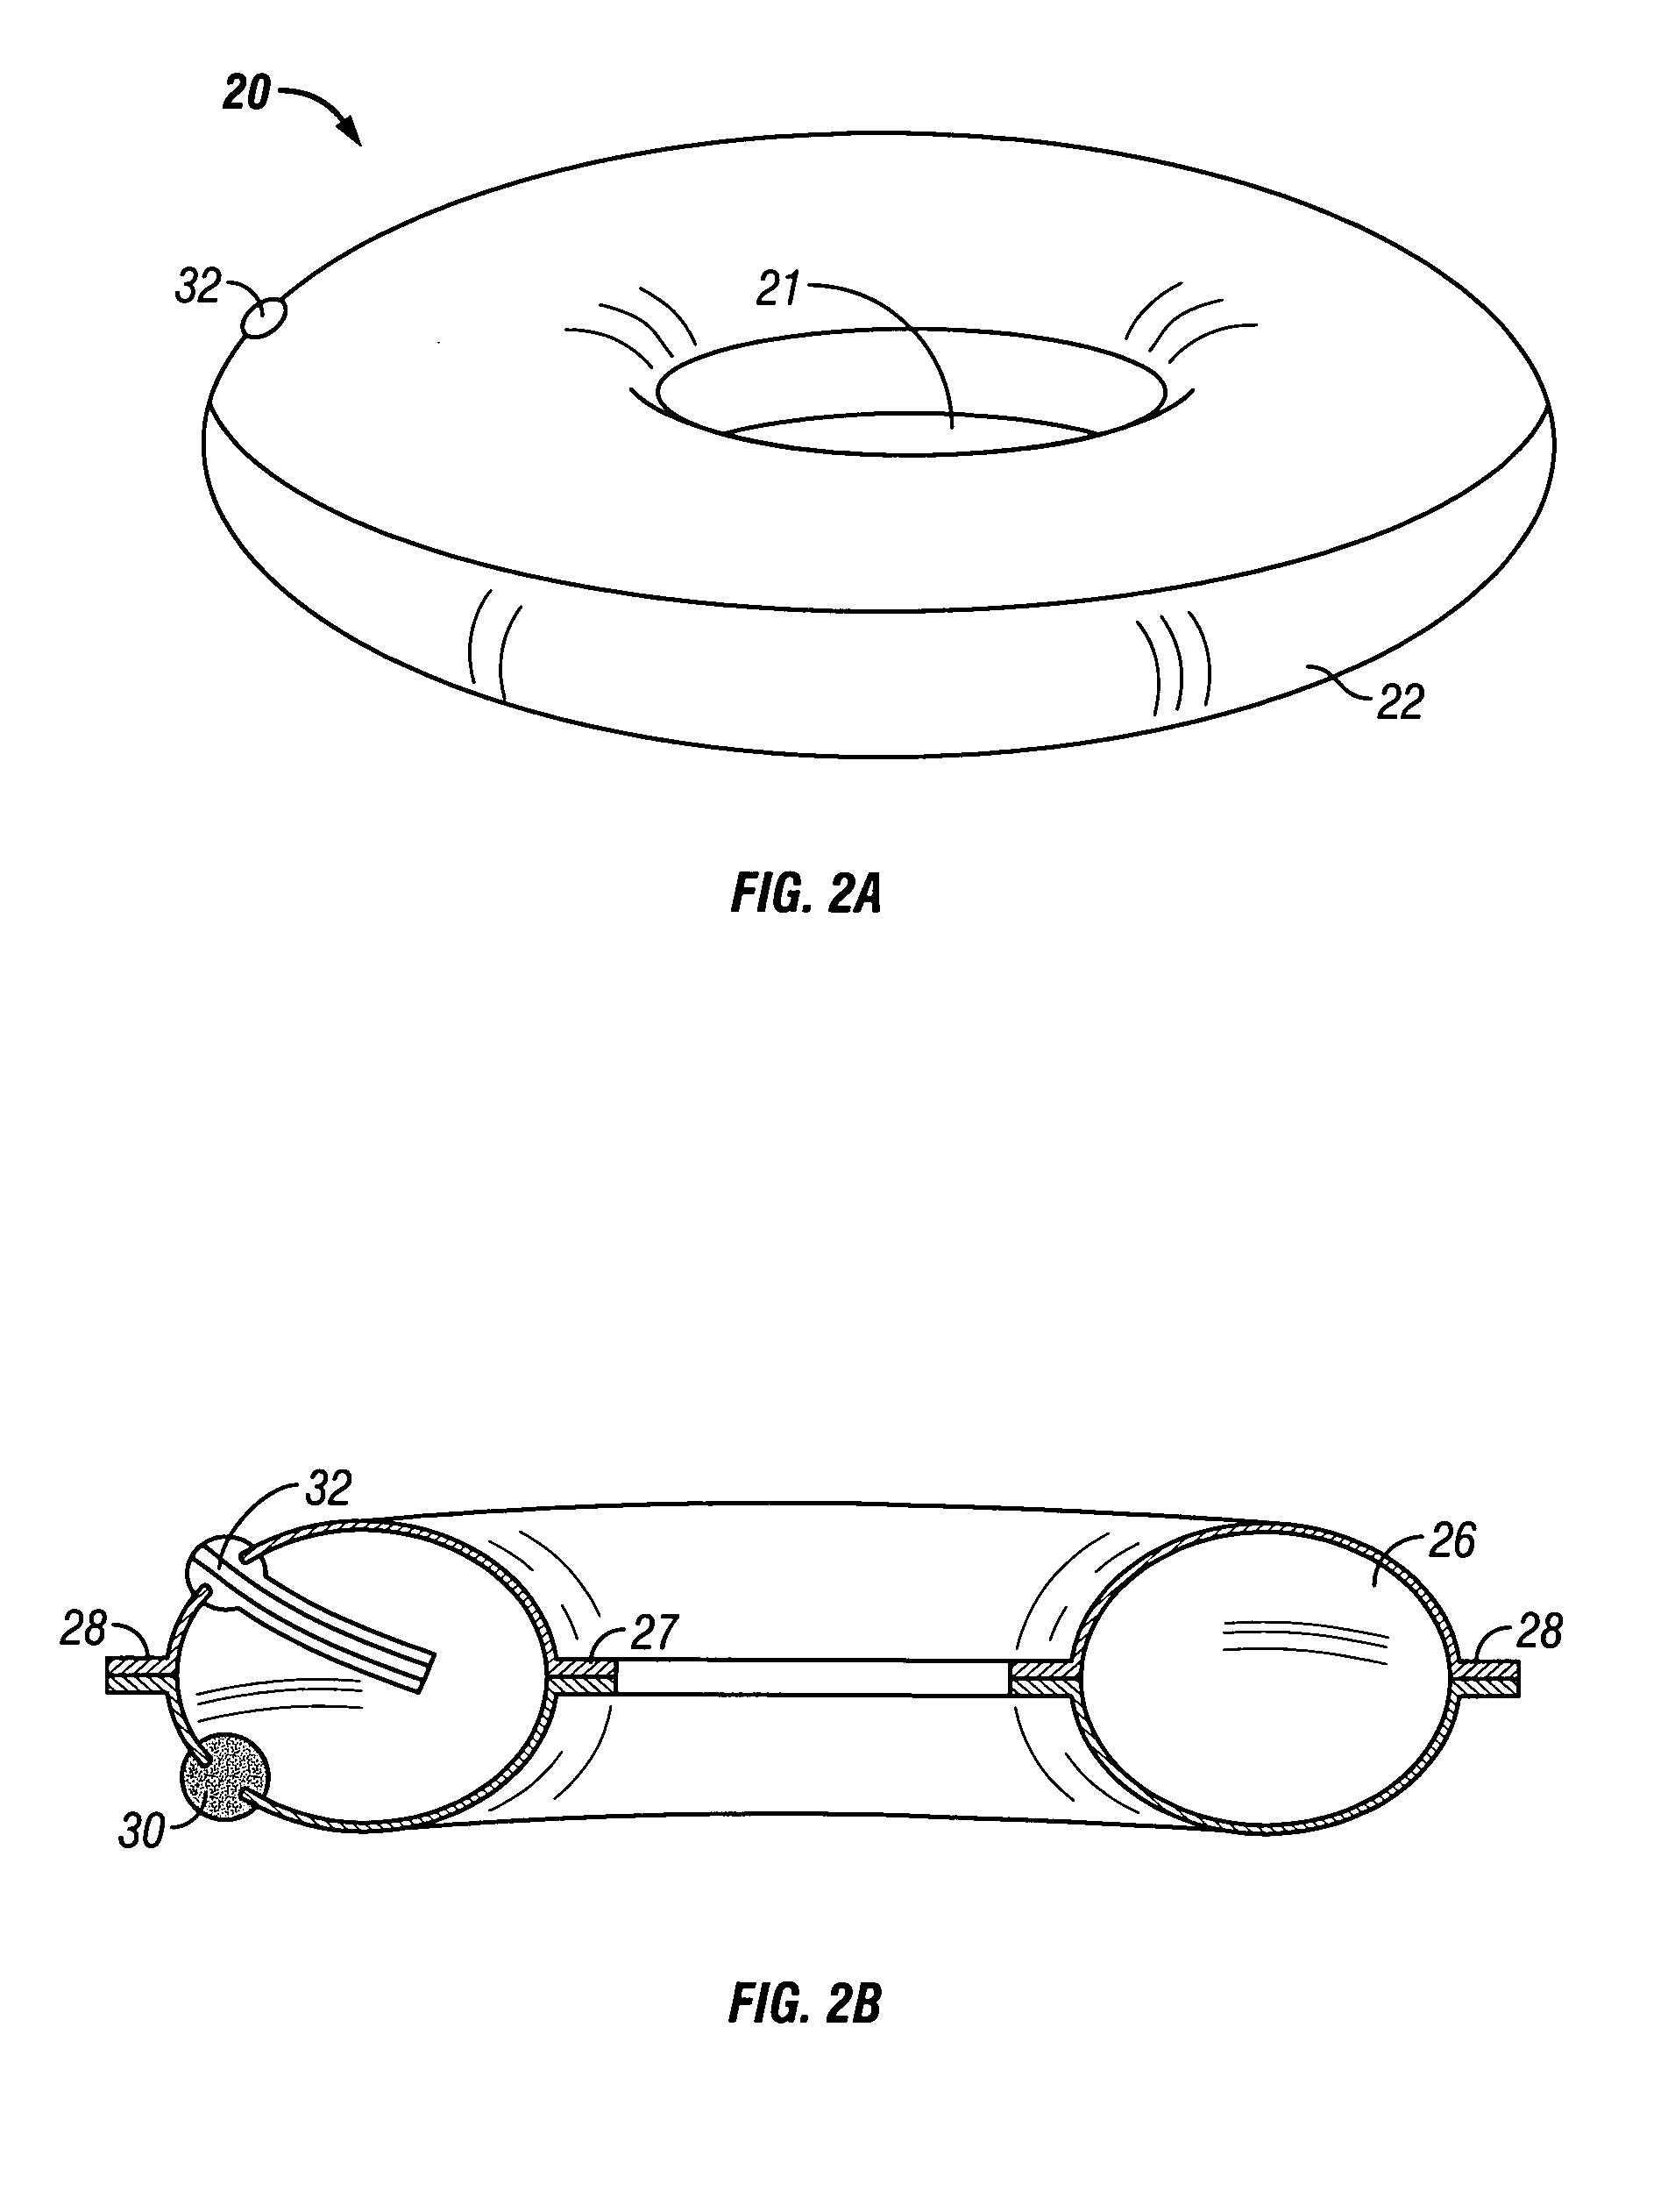 Overweight control apparatuses for insertion into the stomach